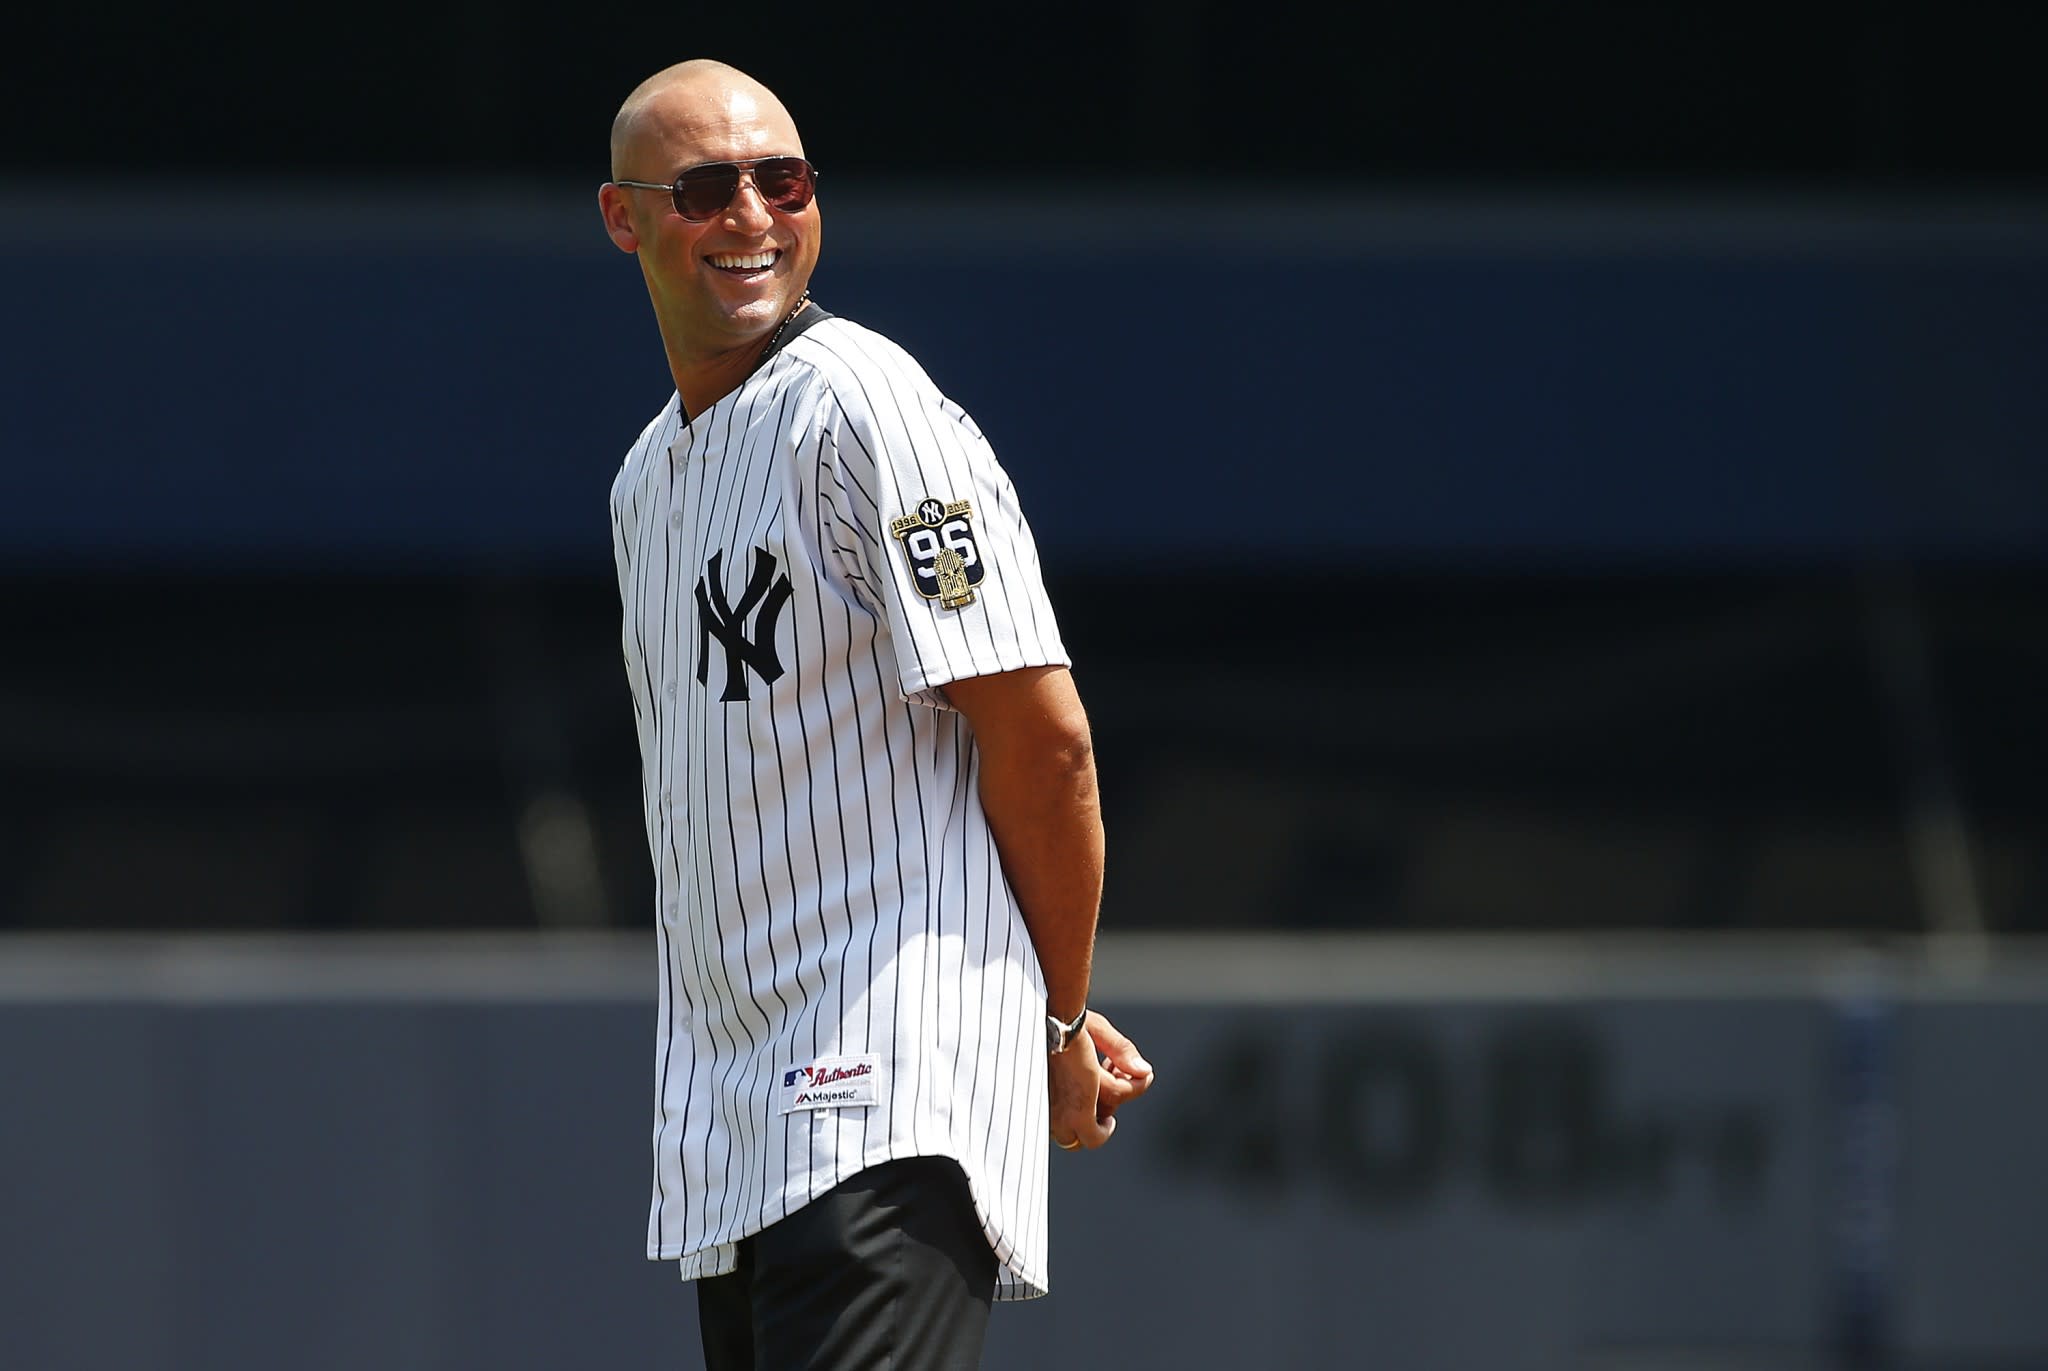 Derek Jeter is the perfect face and owner for the dysfunctional Miami Marlins